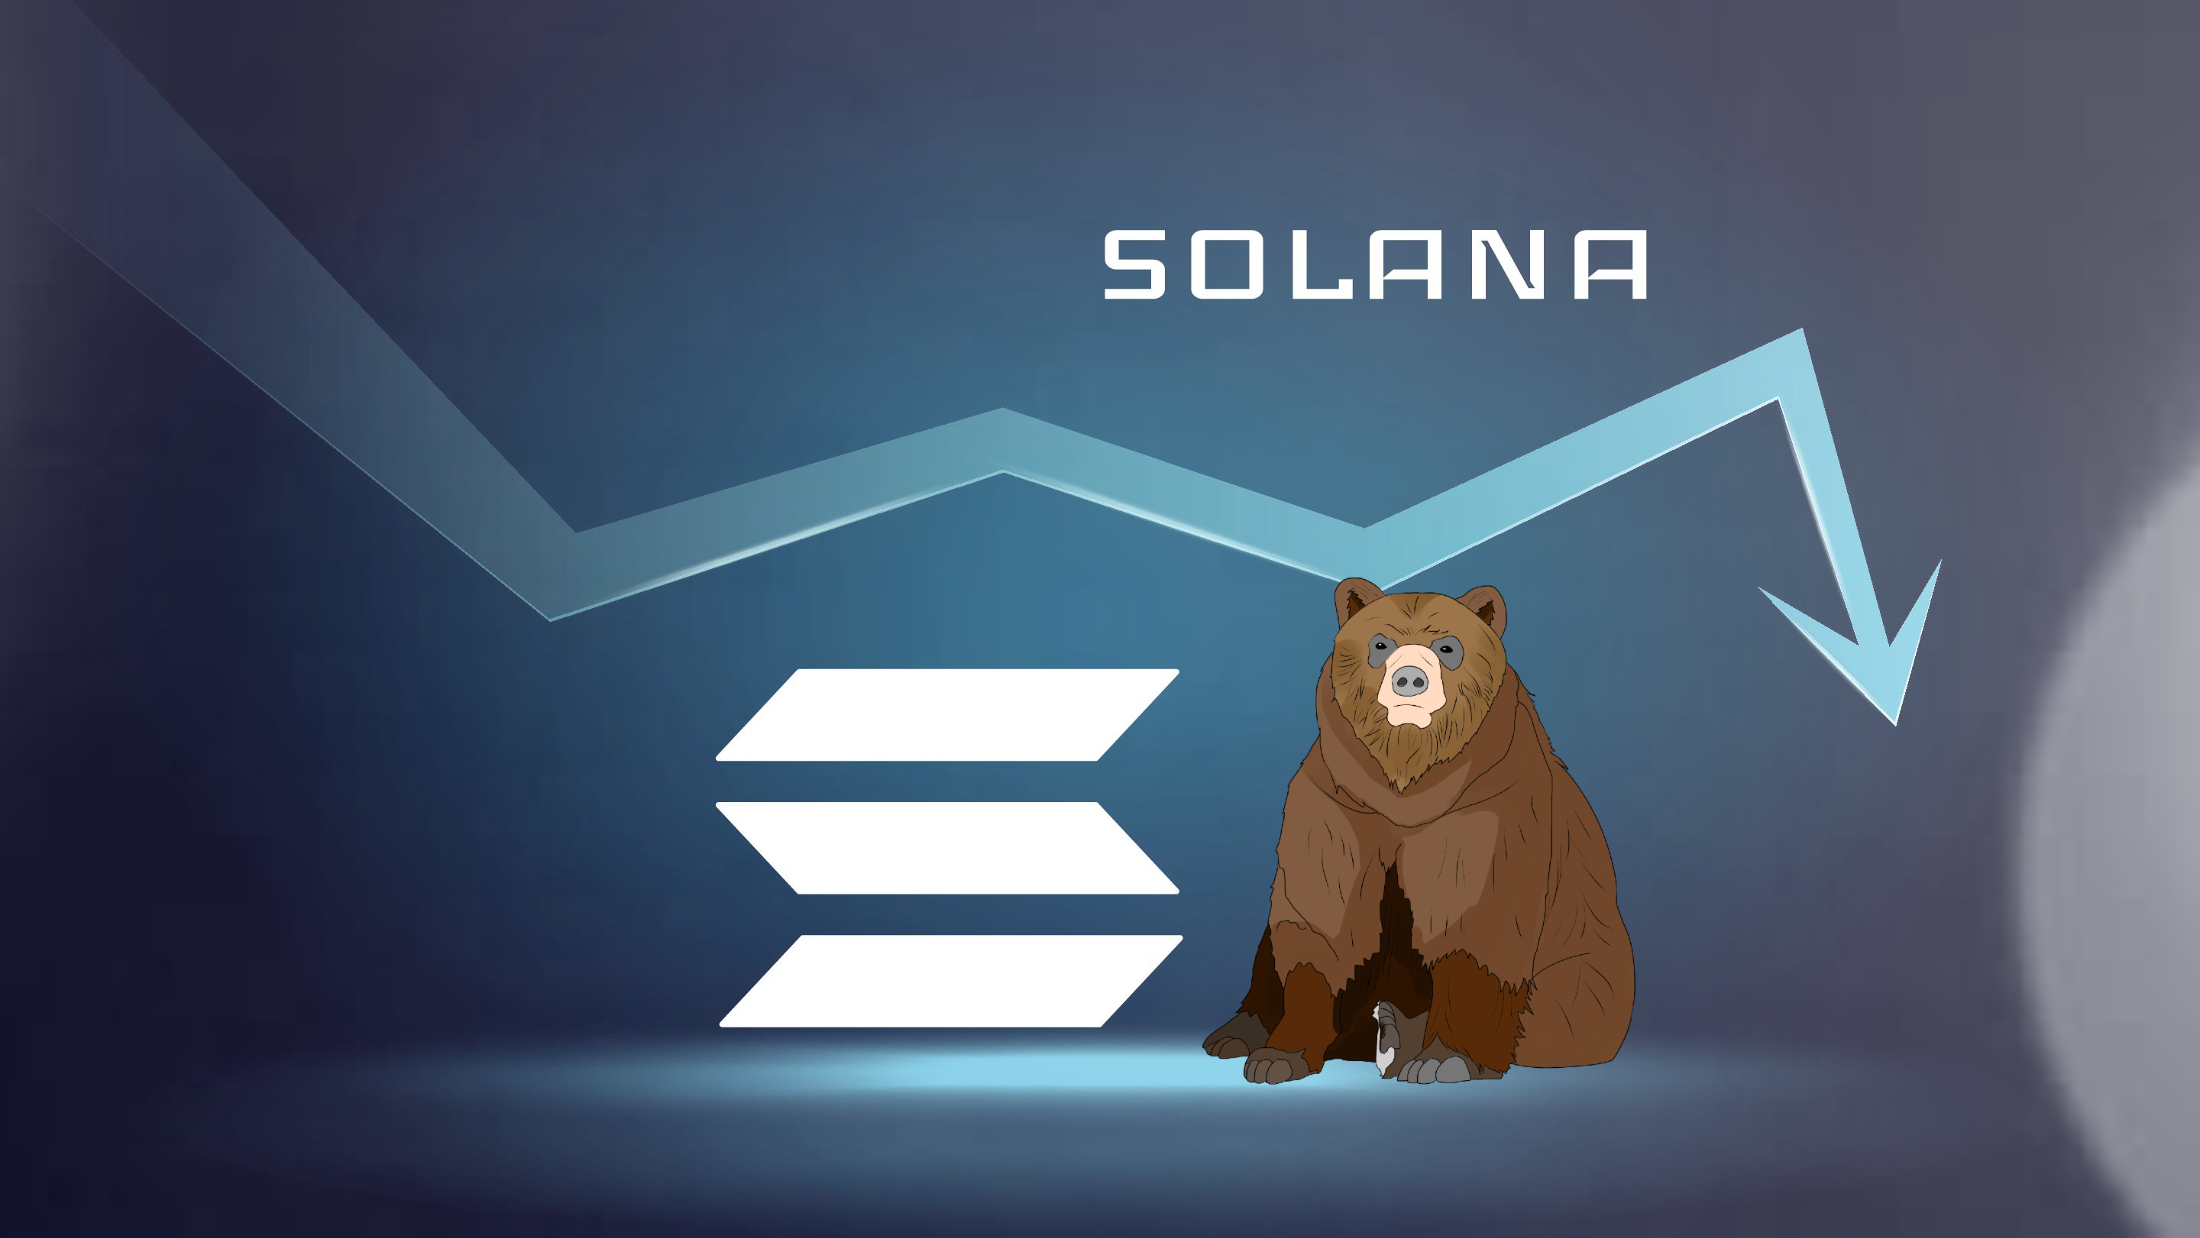 Troubles worsened for Solana as key NFT projects migrated to other blockchains. 